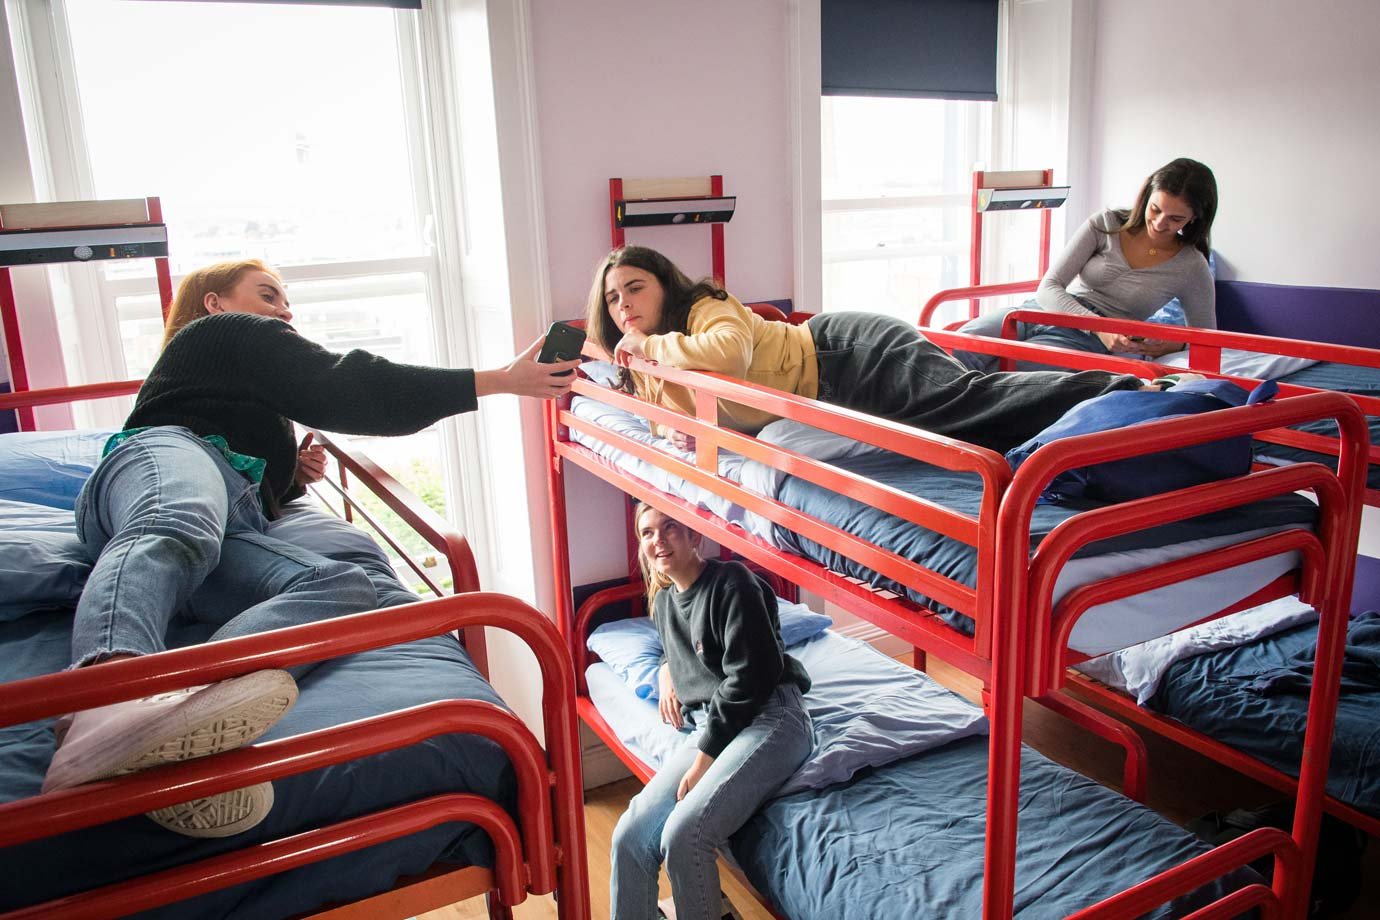 Break After the City Centre Exploration - Students in Red Bunk Beds - Hostel